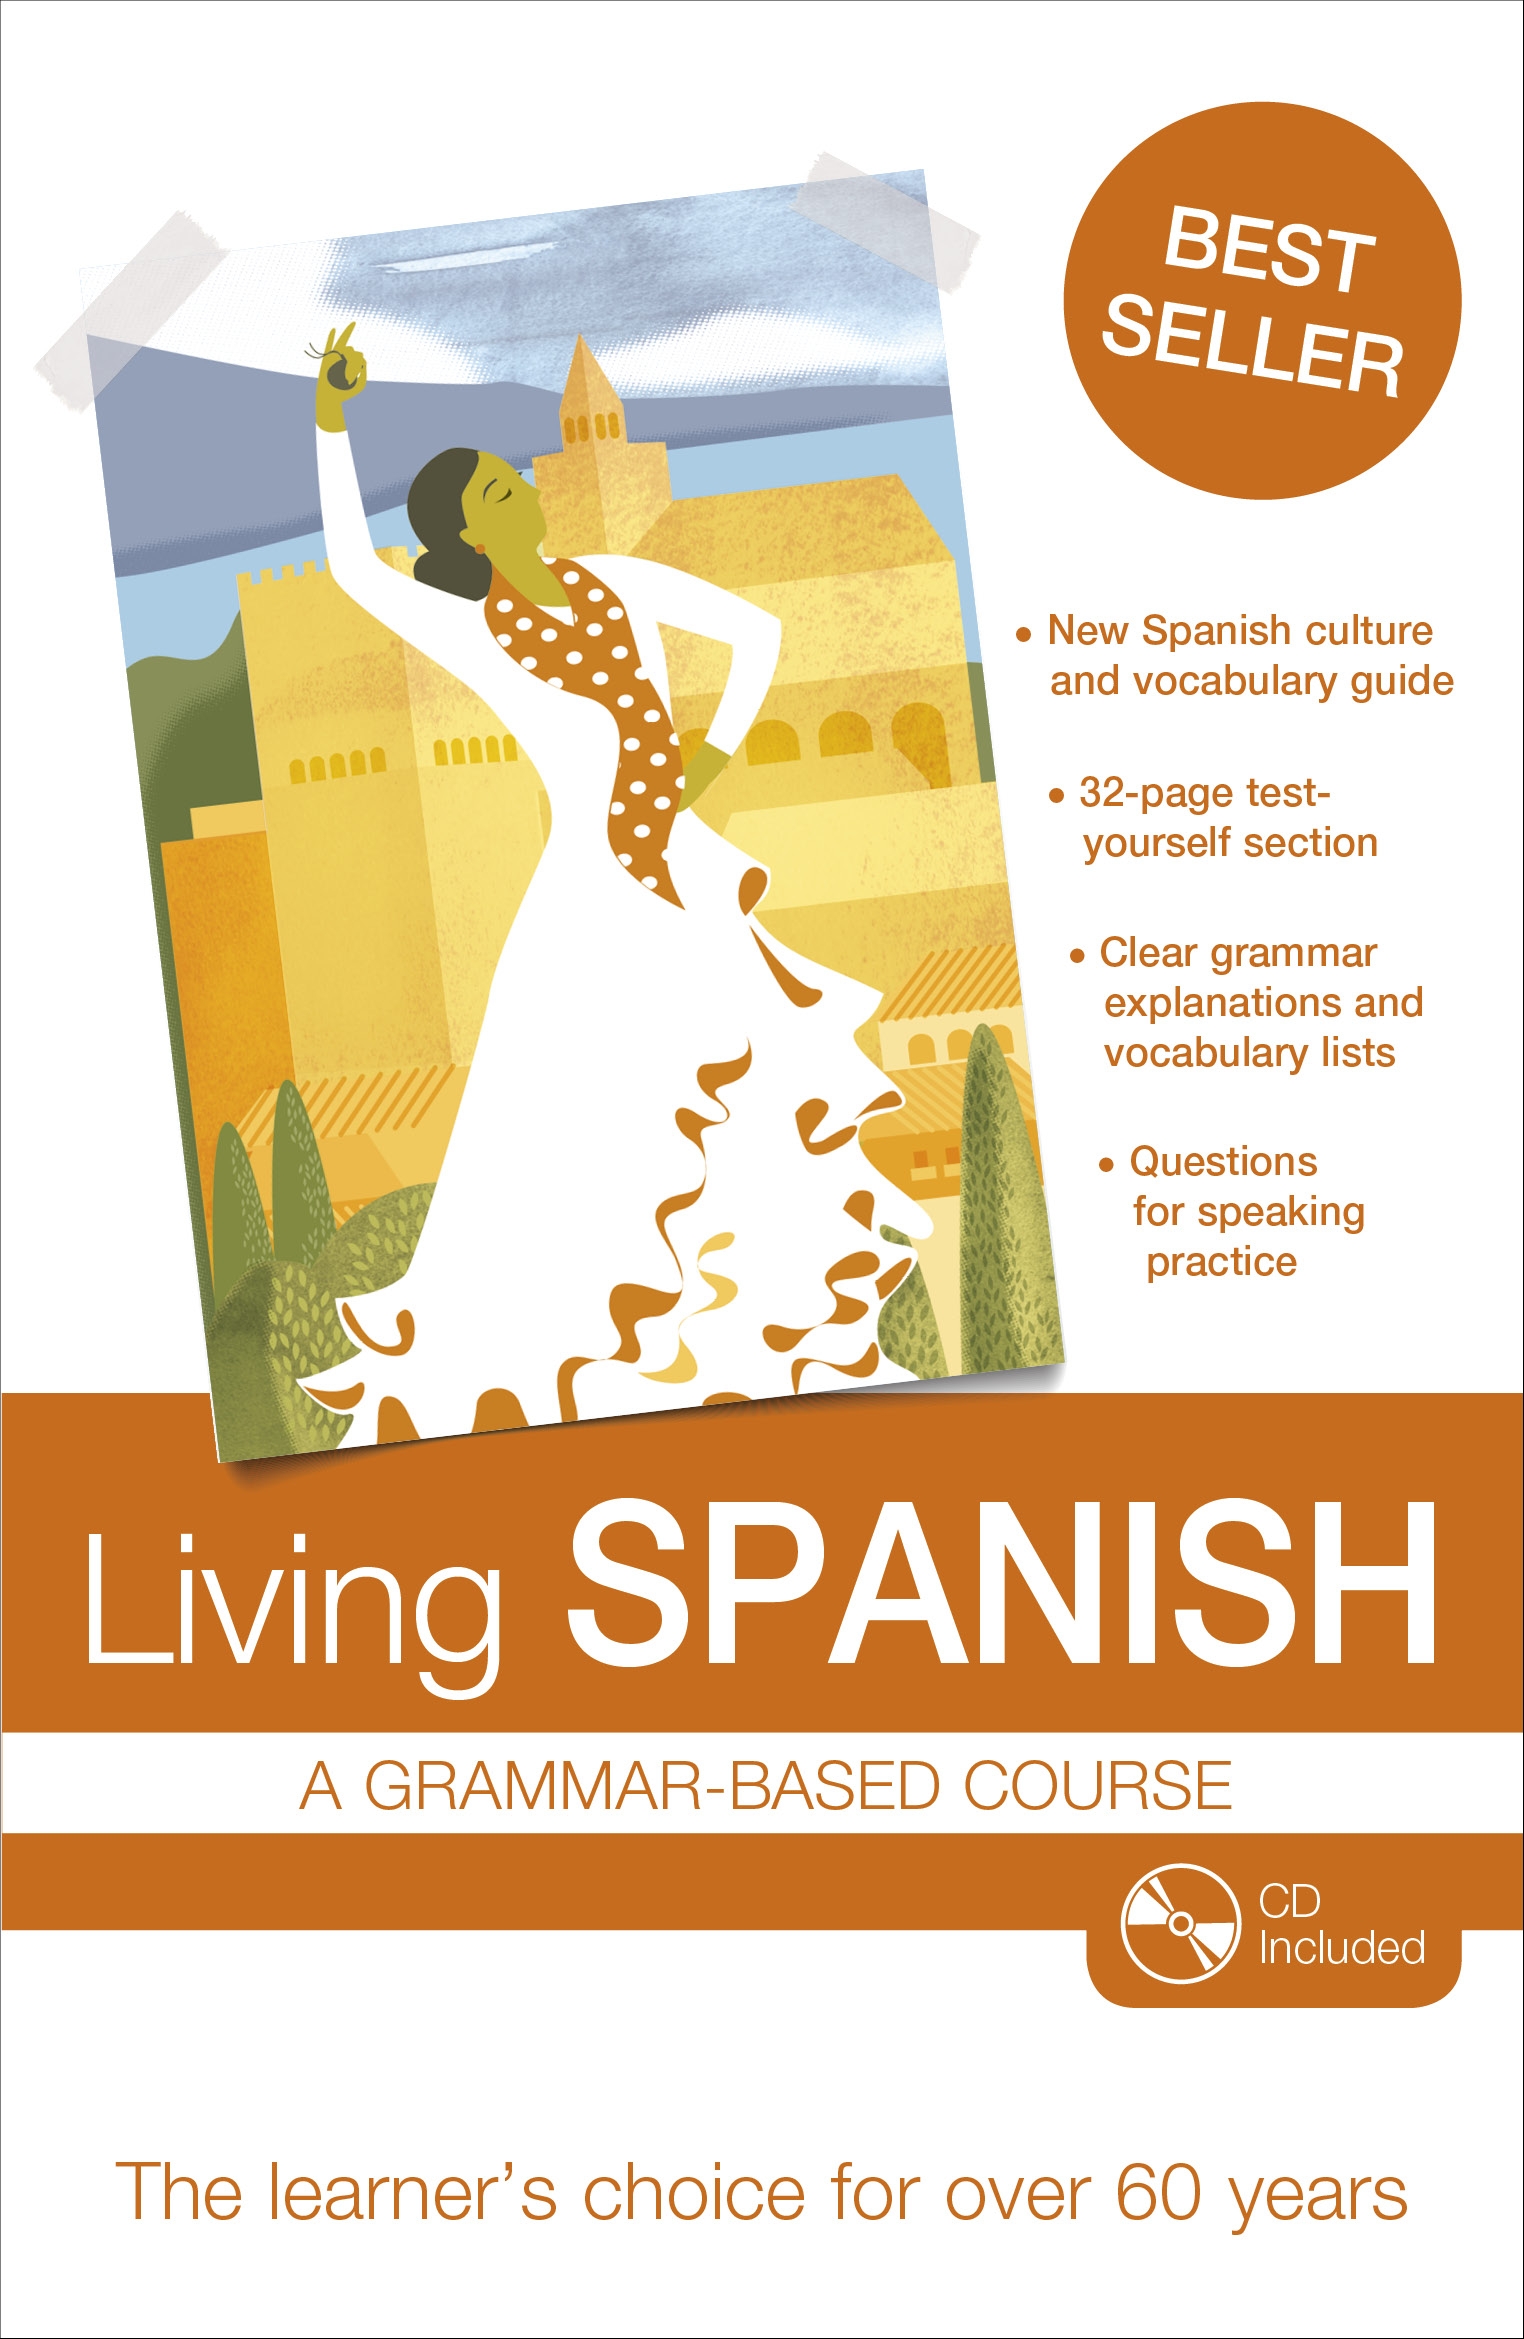 Edition　Spanish:　Grammar-Based　Fifth　Course,　A　Living　Rosa　María　revised　by　Martín